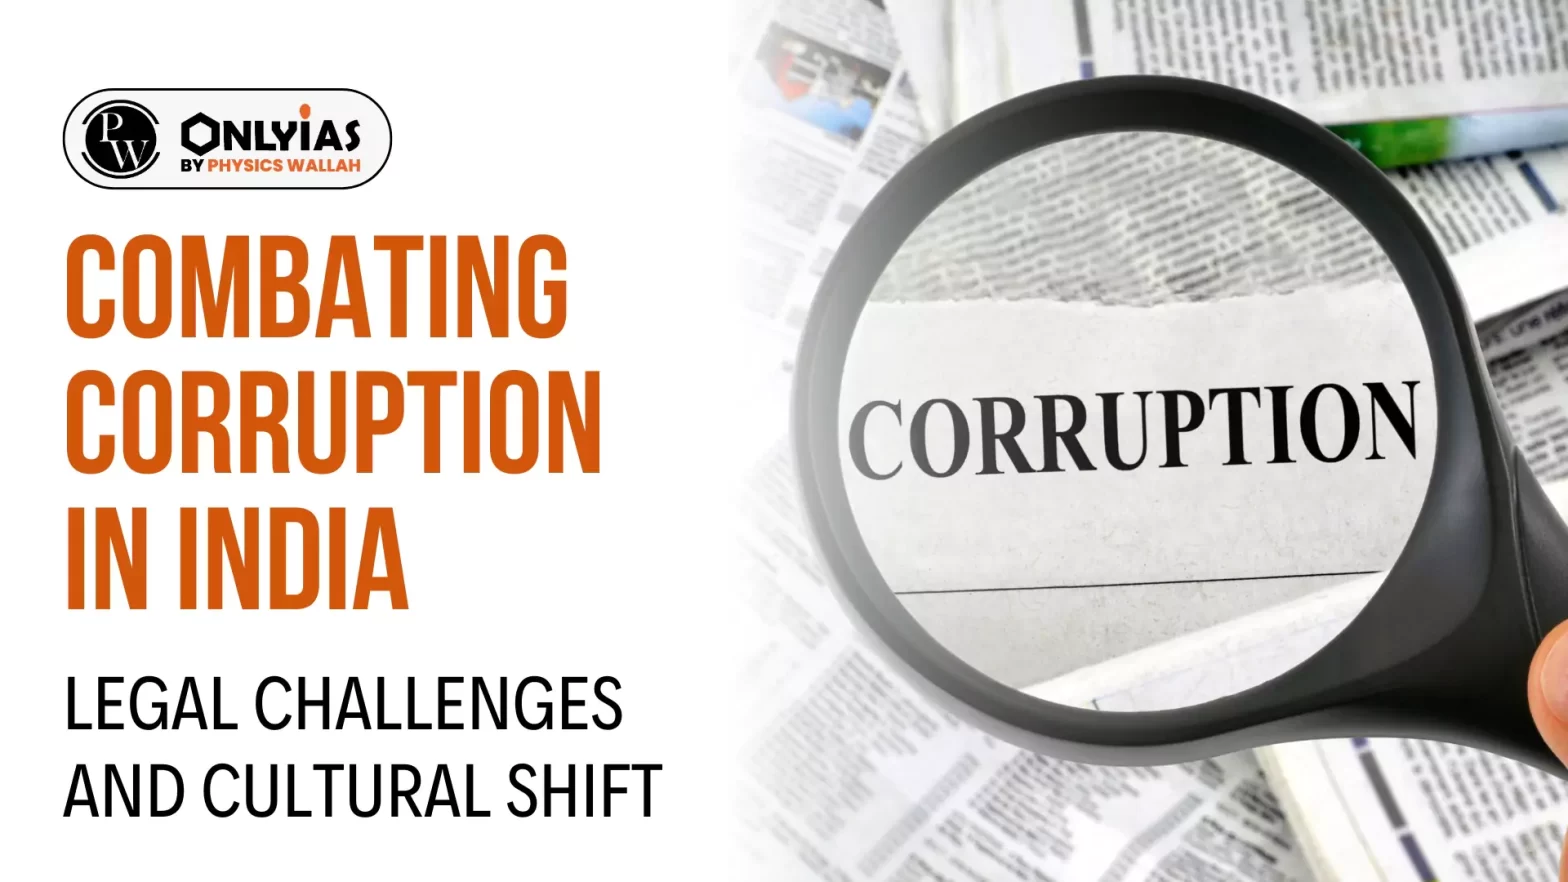 Combating Corruption in India: Legal Challenges and Cultural Shift